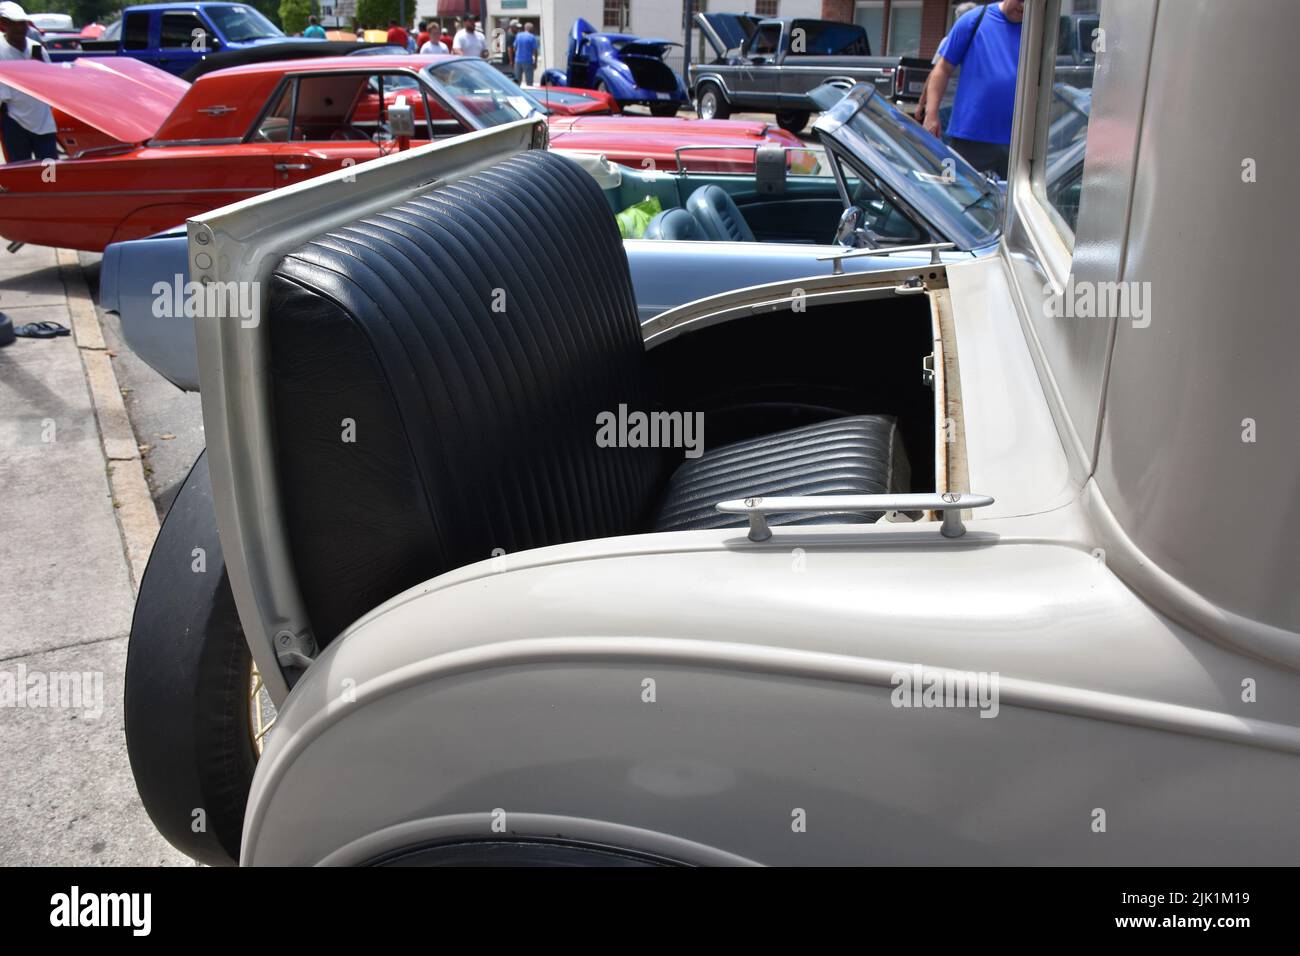 A 1930 Ford Model A with a Rumble Seat in the rear on display at a car show. Stock Photo